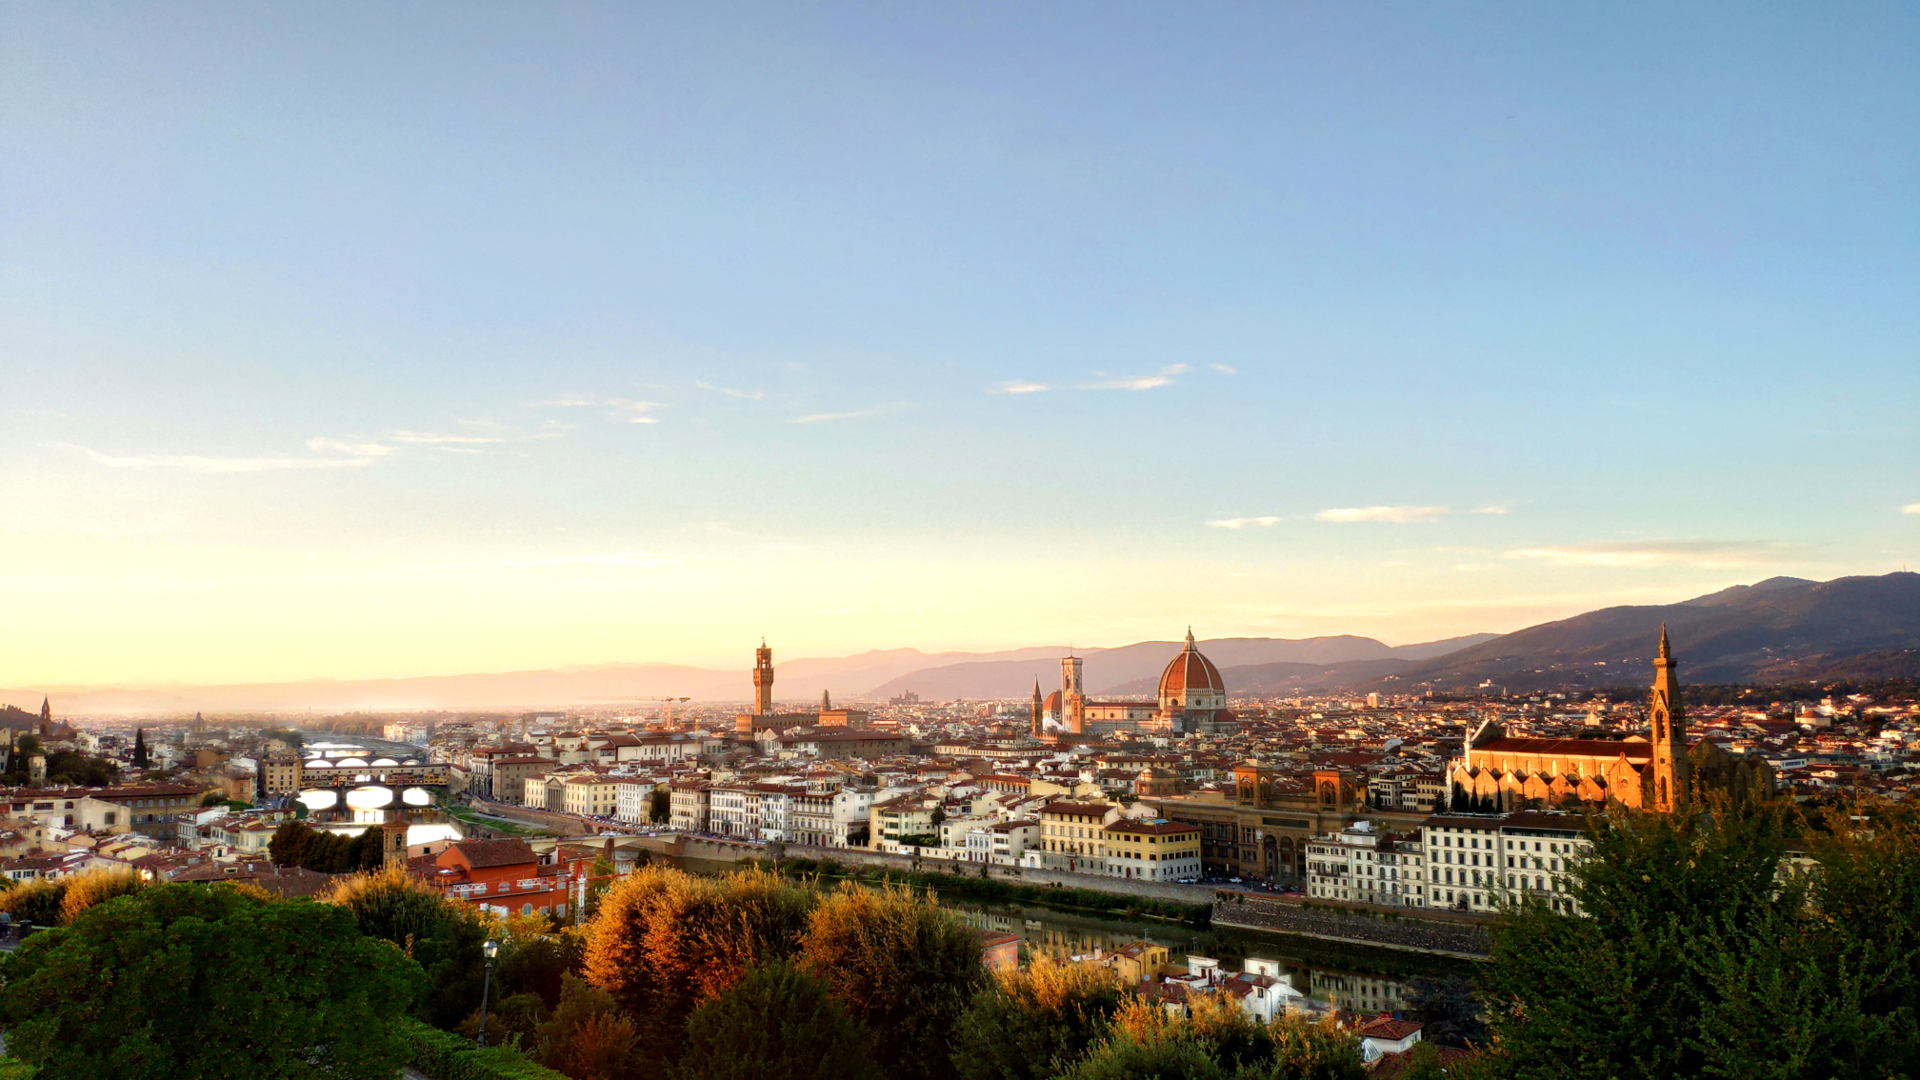 General 1920x1080 Florence Italy city mountains sunset glow cathedral river trees